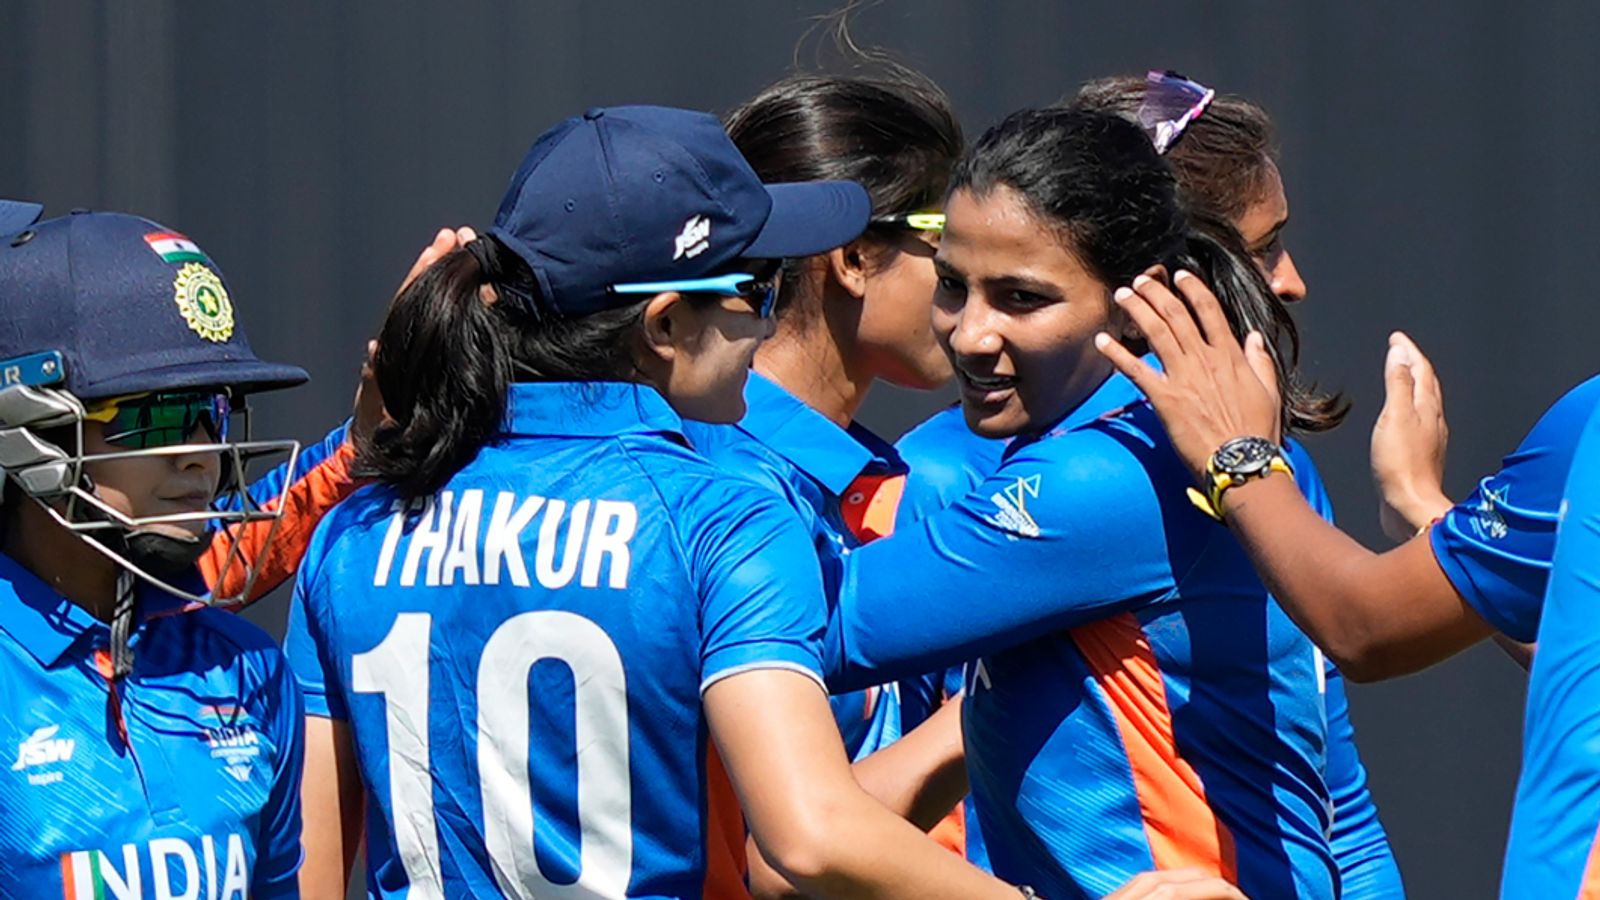 Five franchises confirmed for Women’s IPL as Indian cricket board makes £465m